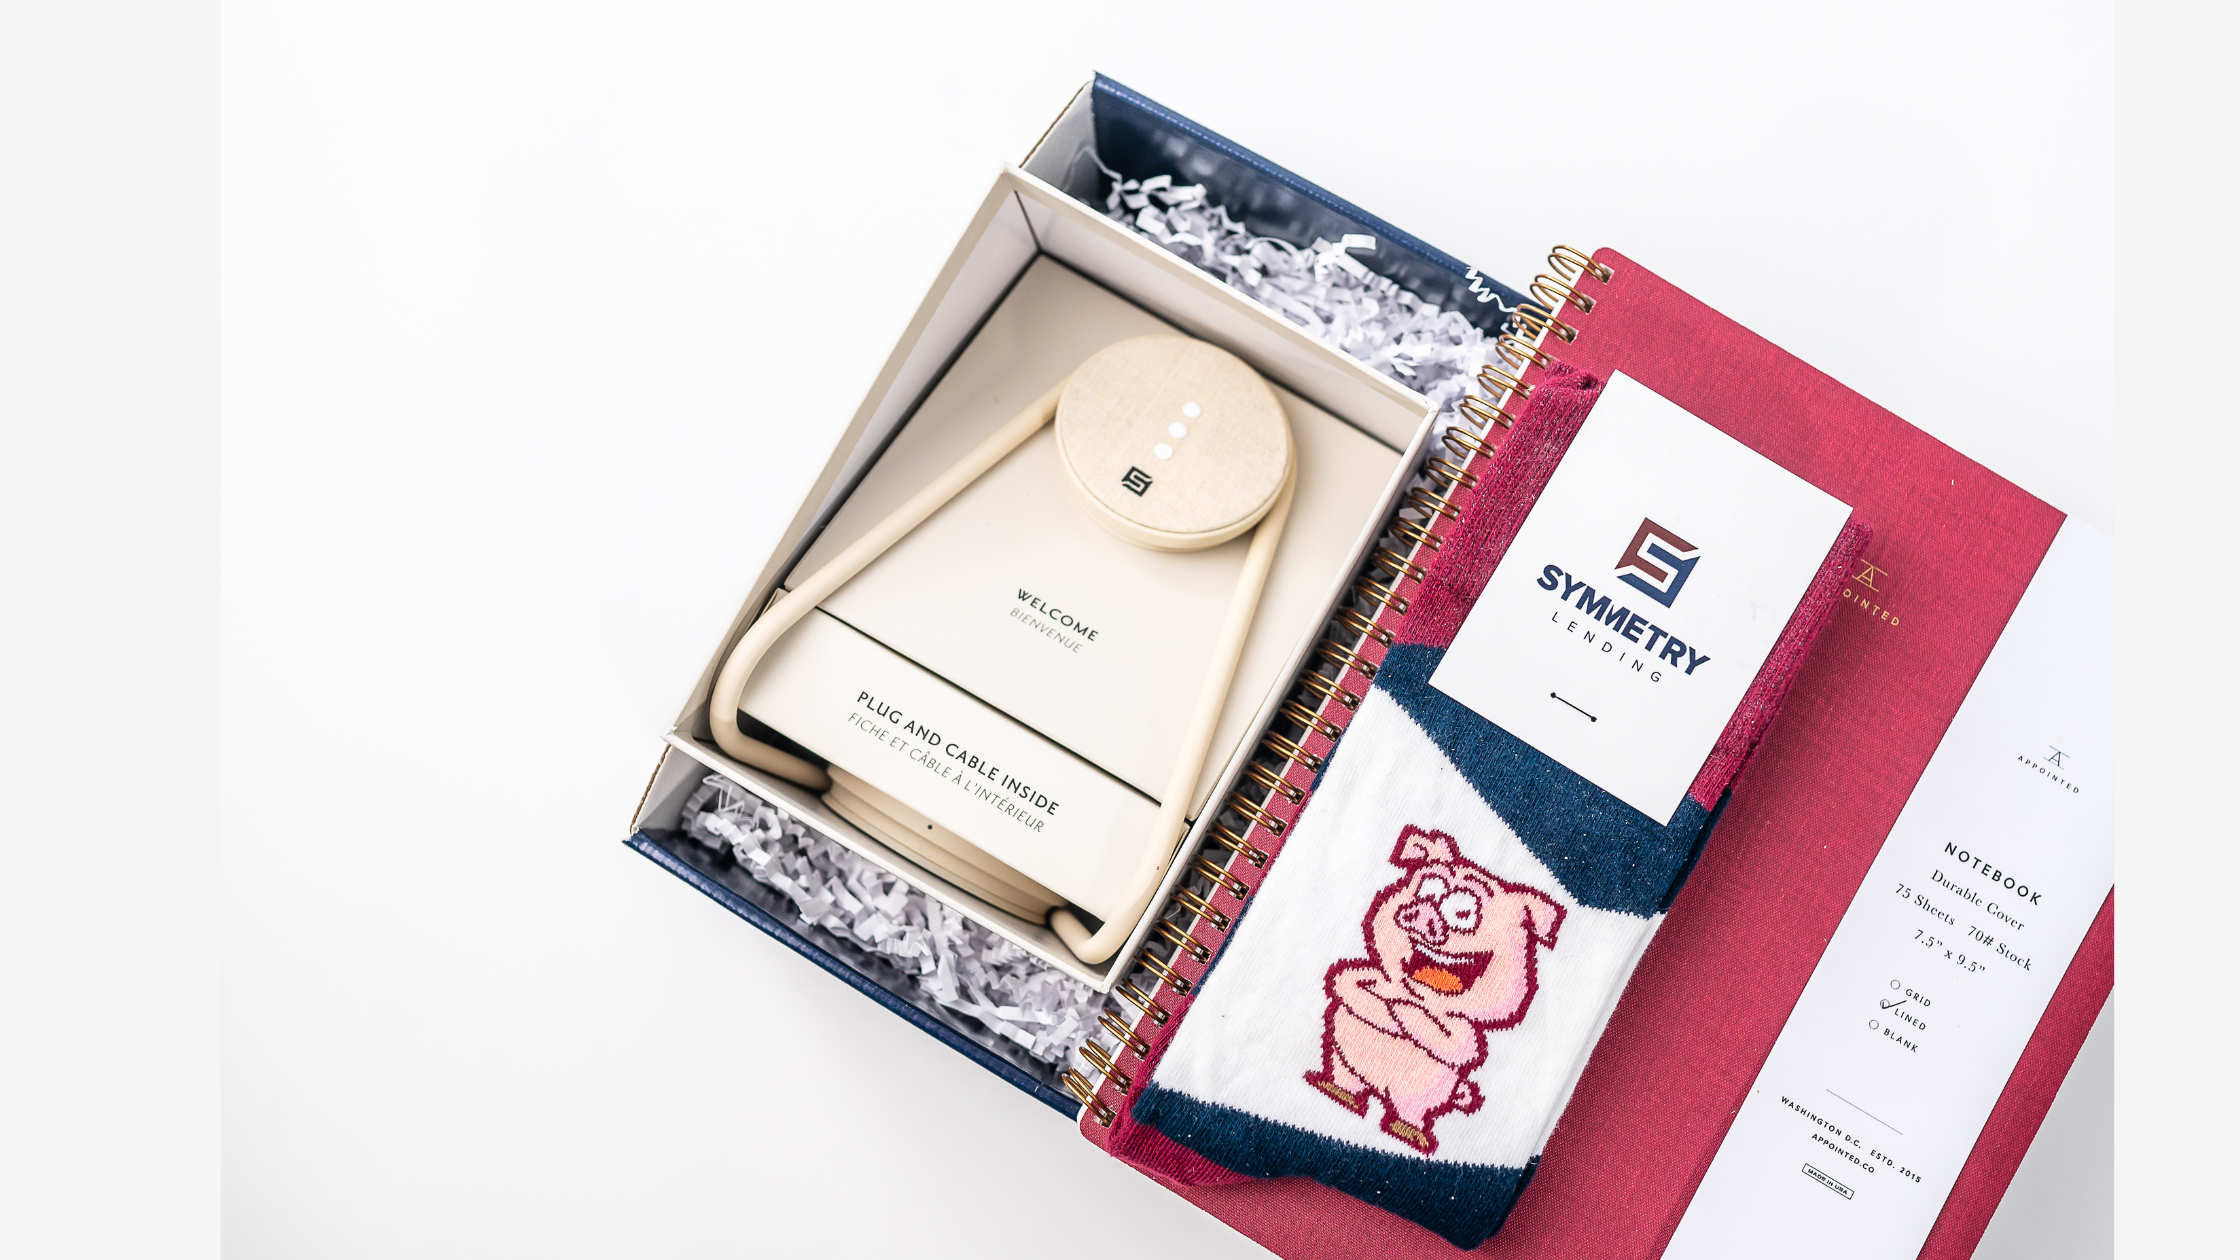 Online store selling customized gift boxes by Studio Umbrella Web